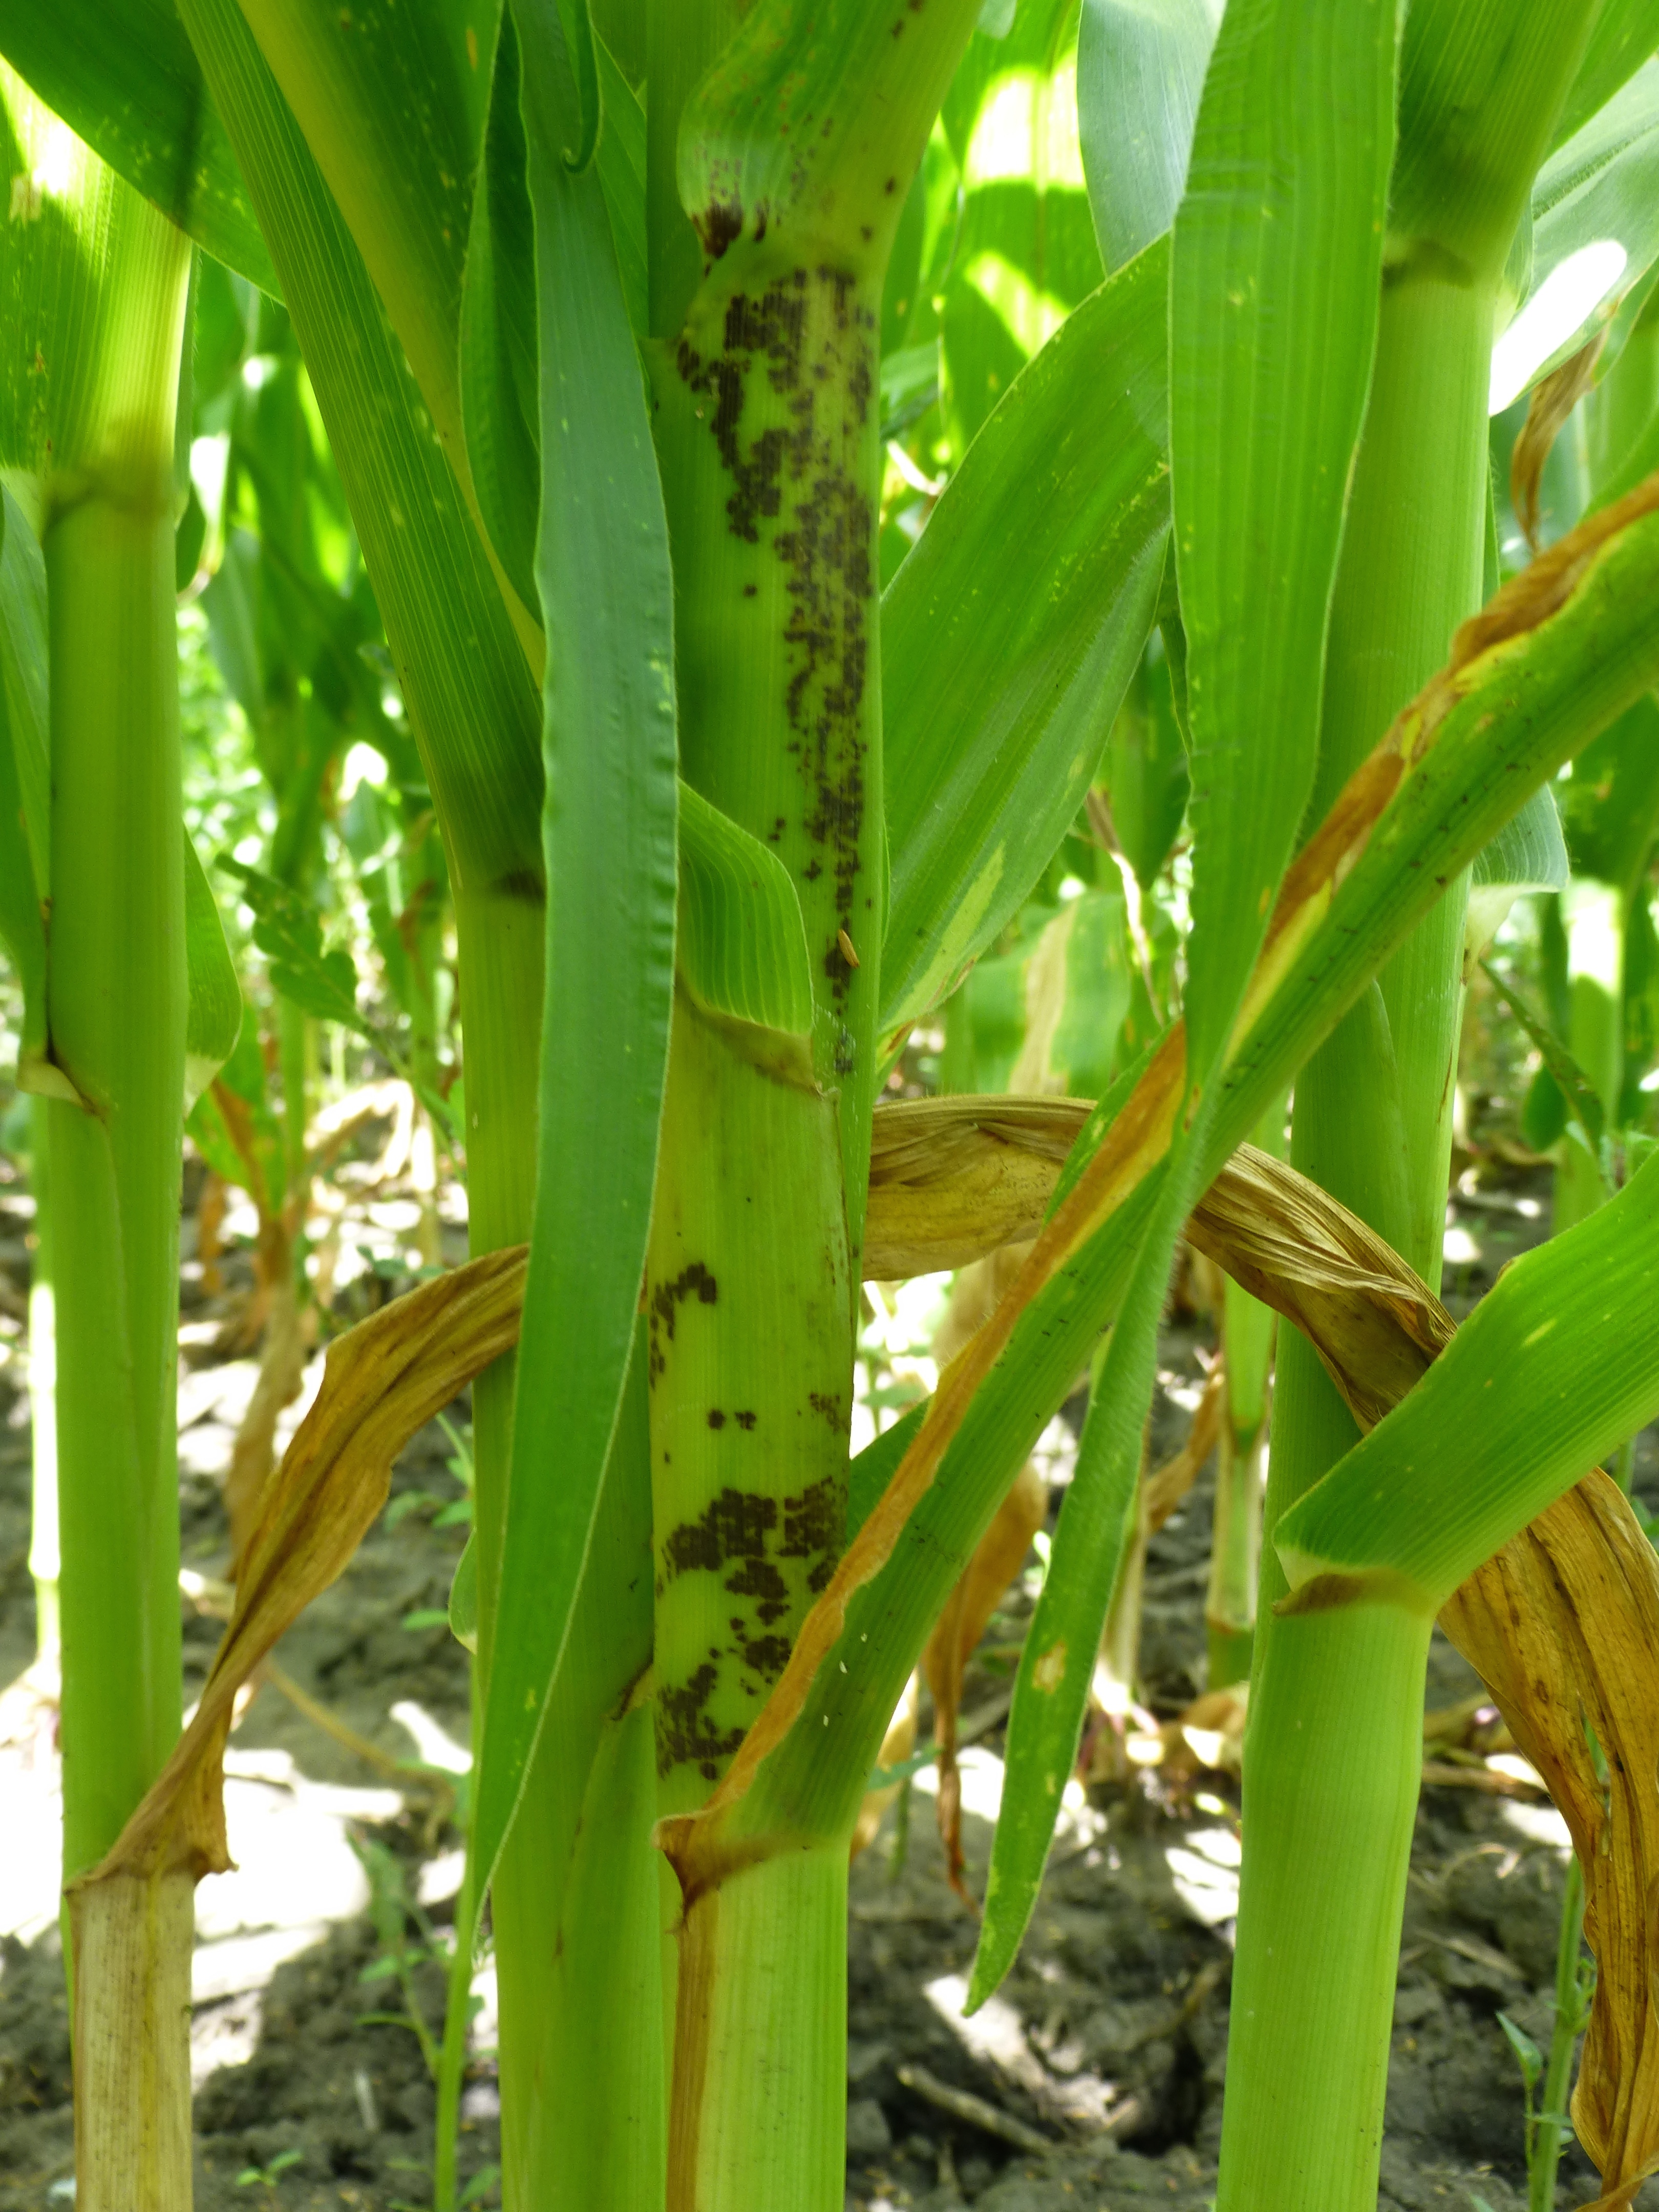 Physoderma brown spot symptoms also may occur on the stalk, leaf sheath, and husks.